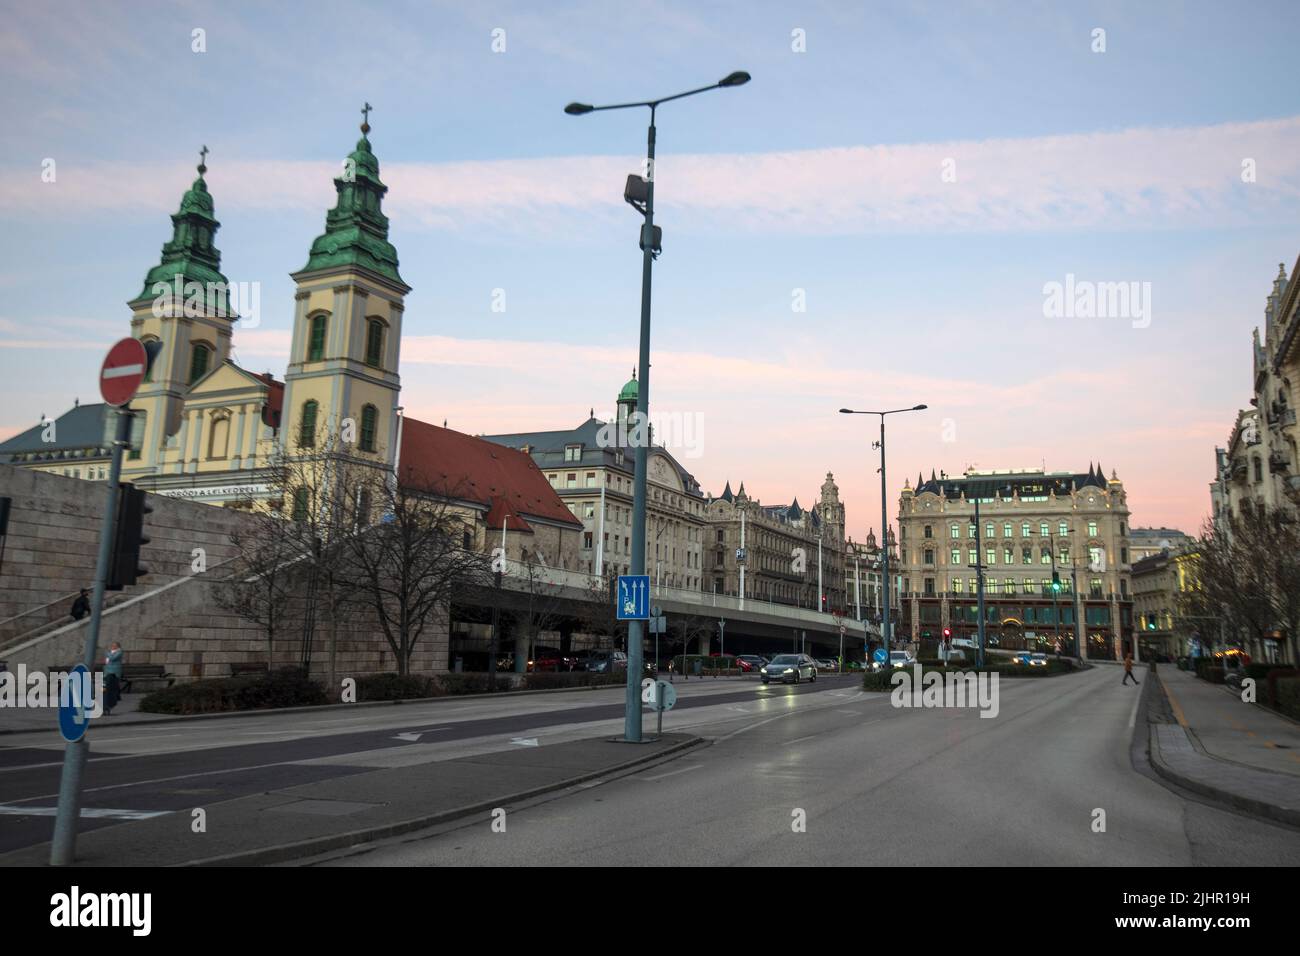 Budapest: March 15 Square. The Main Parish Church of the Assumption and Klotild Palaces. Hungary Stock Photo